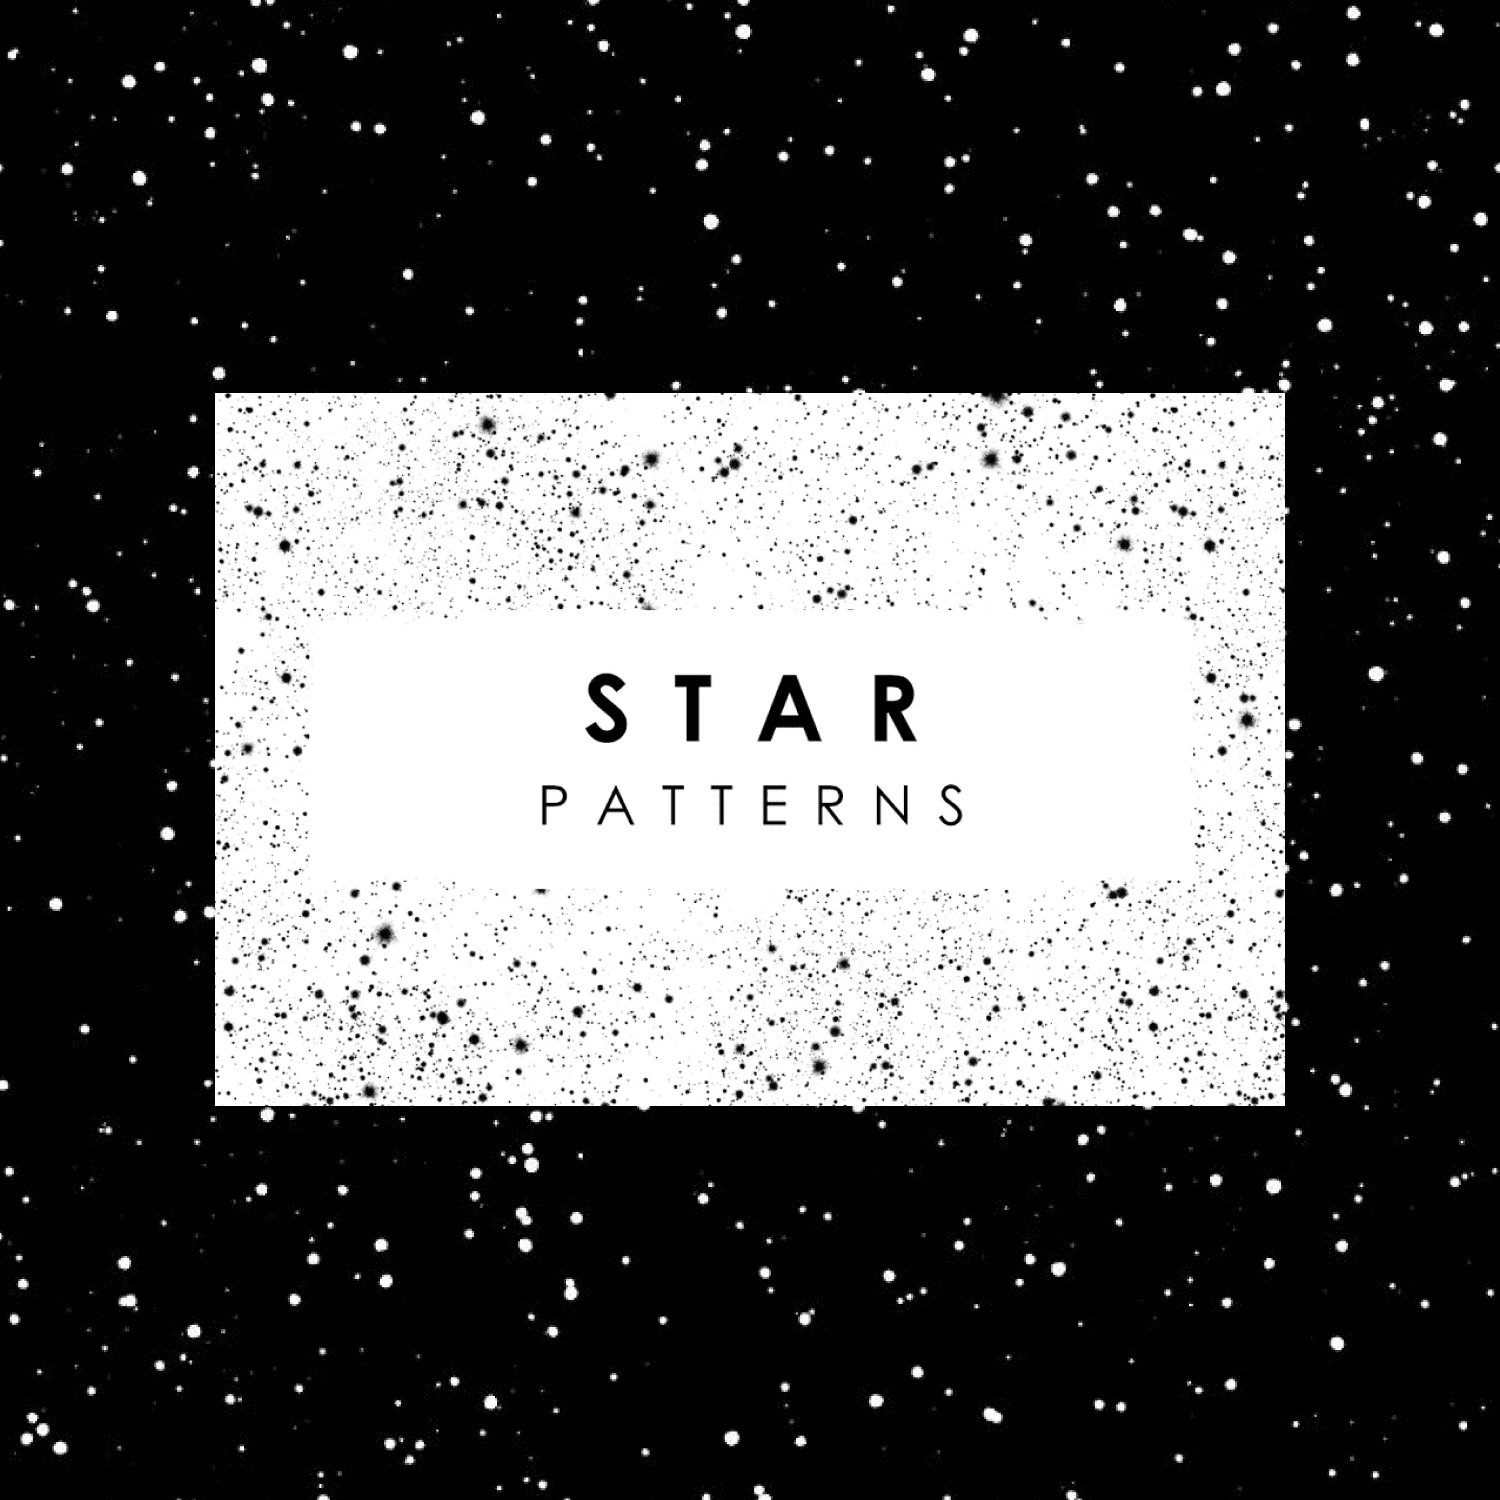 Star Patterns cover.